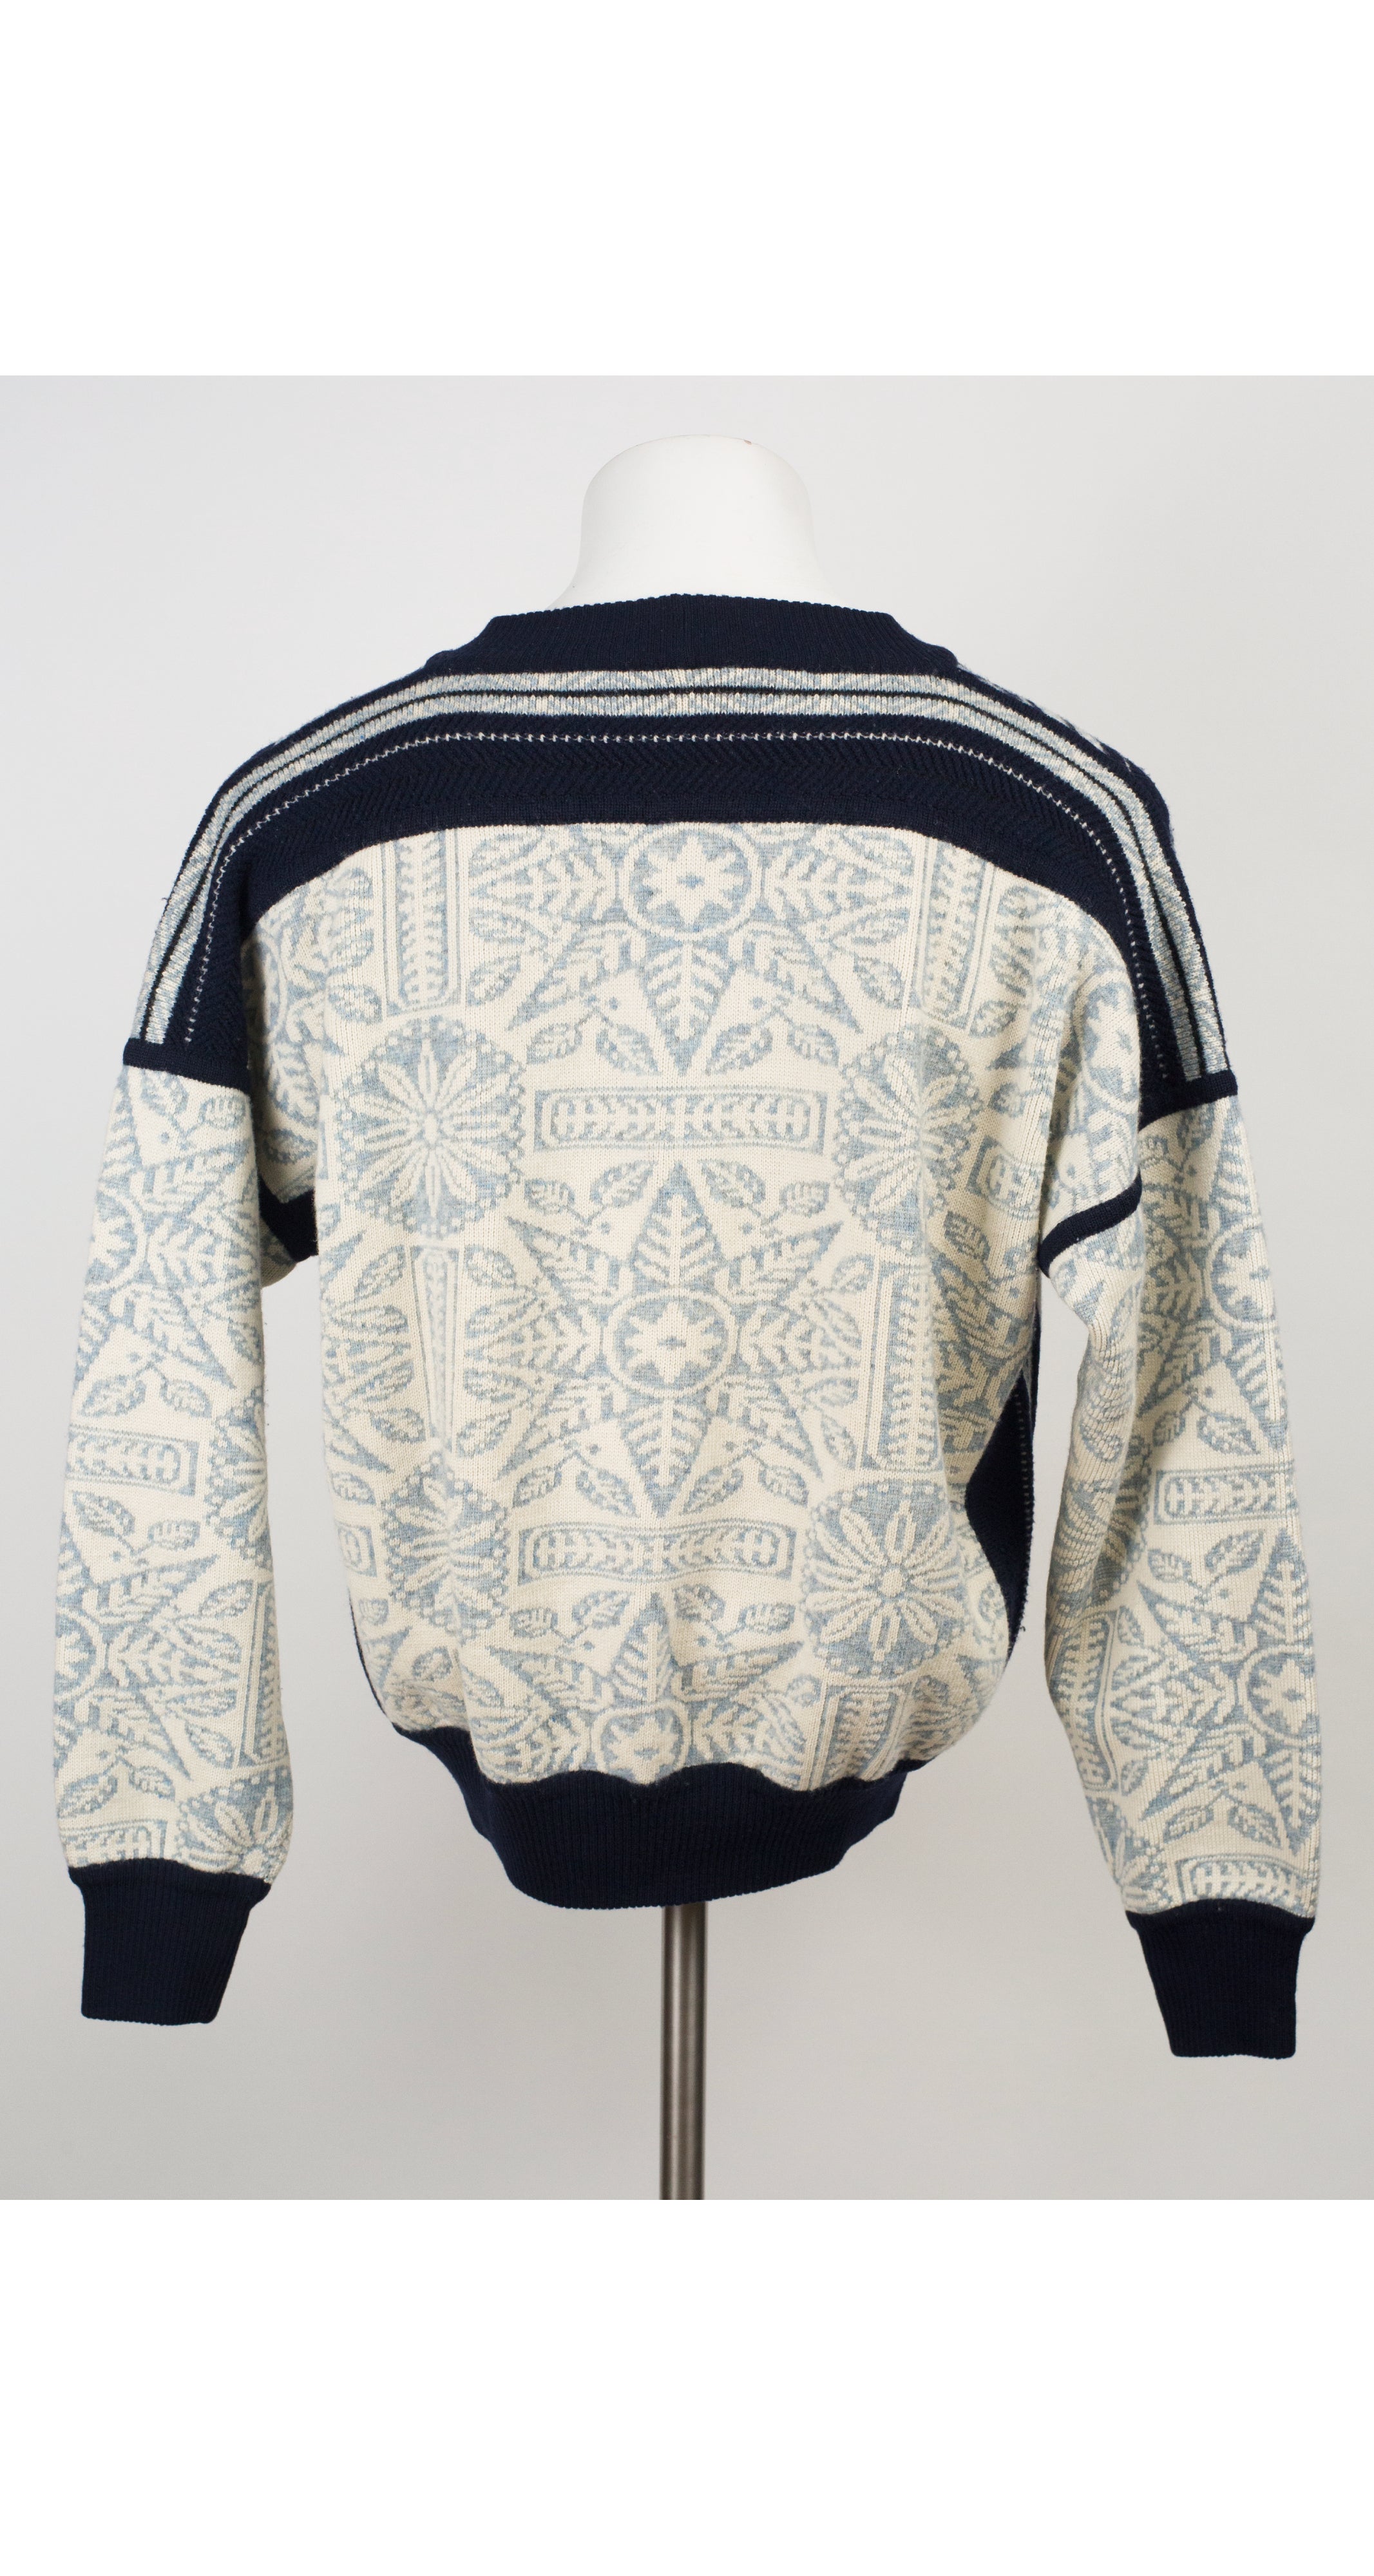 1985 F/W Men's Nordic-Inspired Pullover Sweater